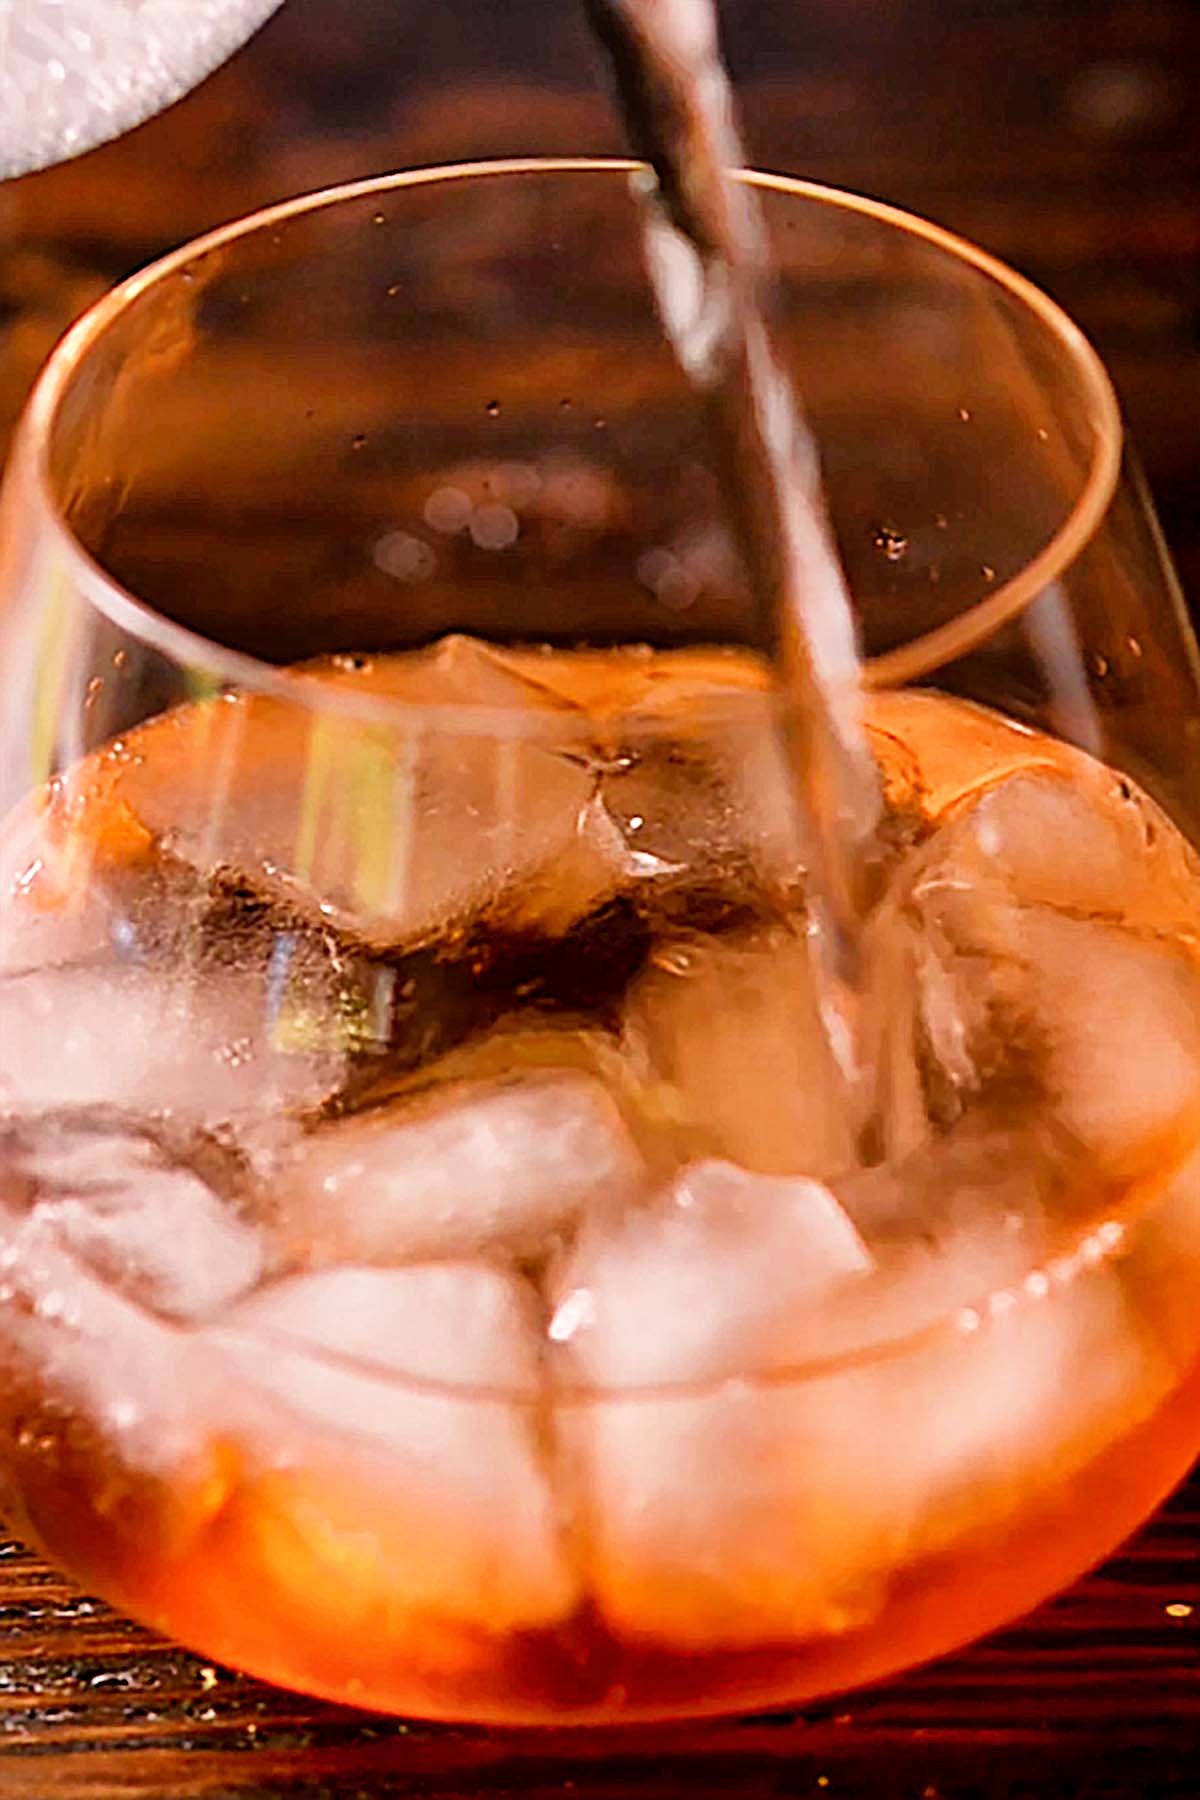 A splash of Tonic Water being added to a wine glass of Ice, Prosecco, and Aperol.